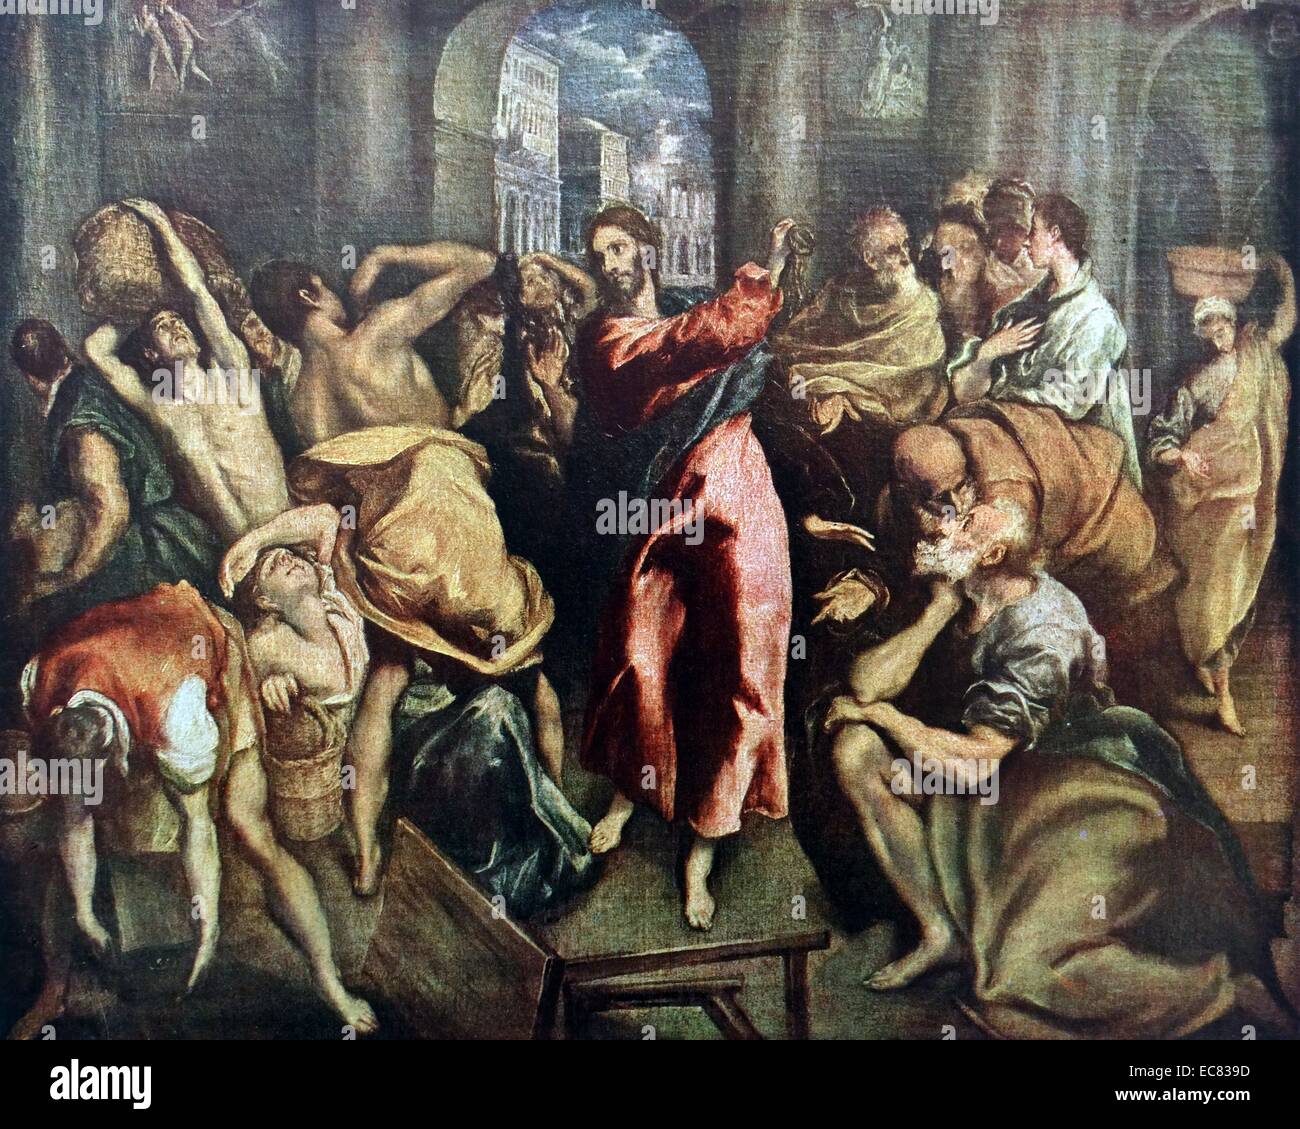 Painting titled 'The Cleansing of the Temple'. The painting depicts Christ driving the Money Changers from the Temple. Painted by El Greco (1541-1614) born Doménikos Theotokópoulos, was a painter, sculptor and architect of the Spanish Renaissance. Dated 16th Century Stock Photo